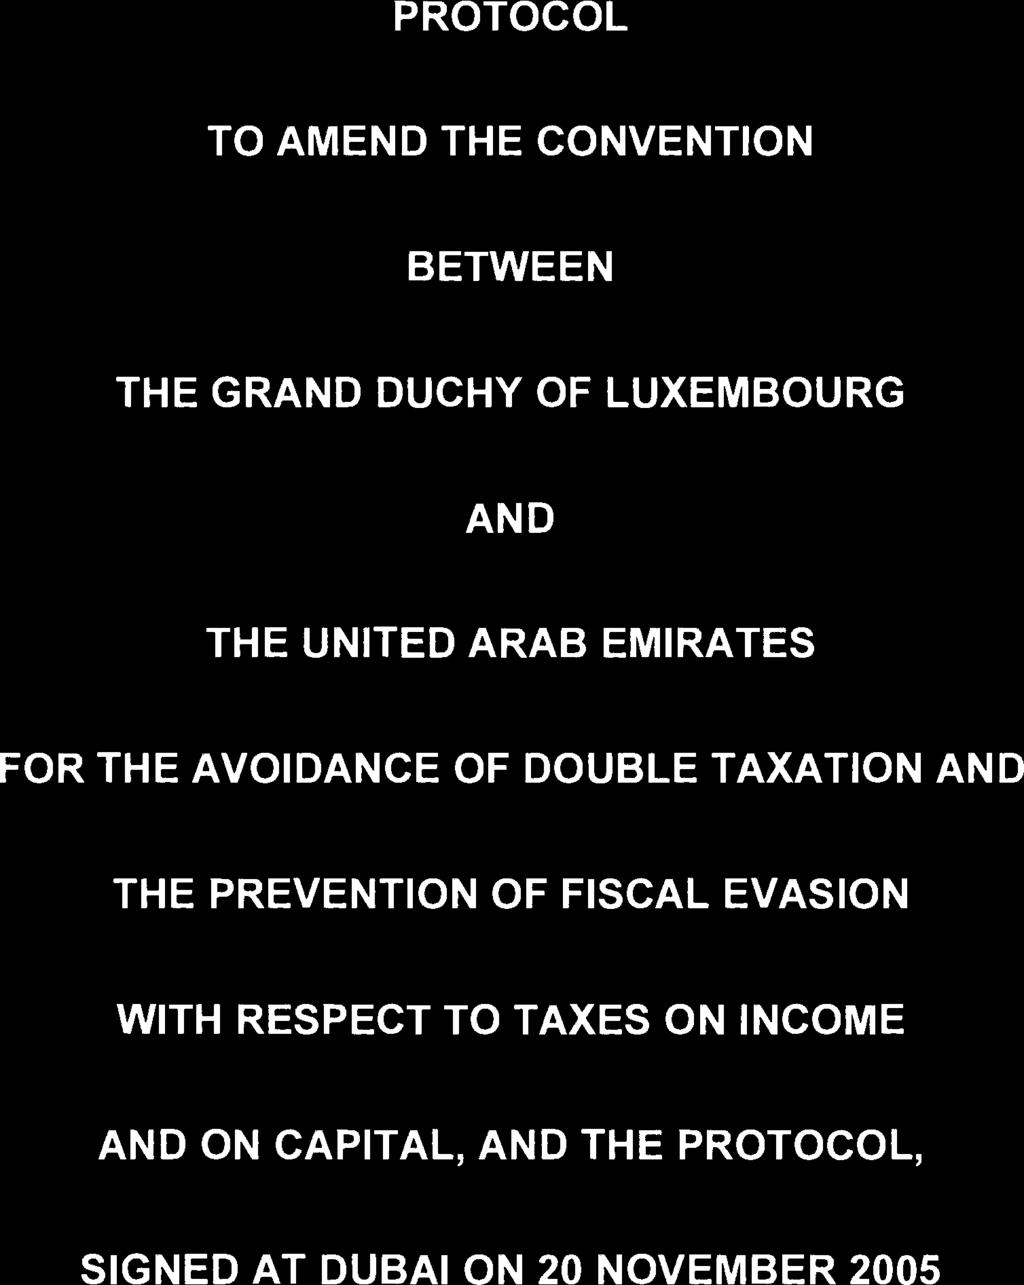 PROTOCOL TO AMEND THE CONVENTION BETWEEN THE GRAND DUCHY OF LUXEMBOURG AND THE UNITED ARAB EMIRATES FOR THE AVOIDANCE OF DOUBLE TAXATION